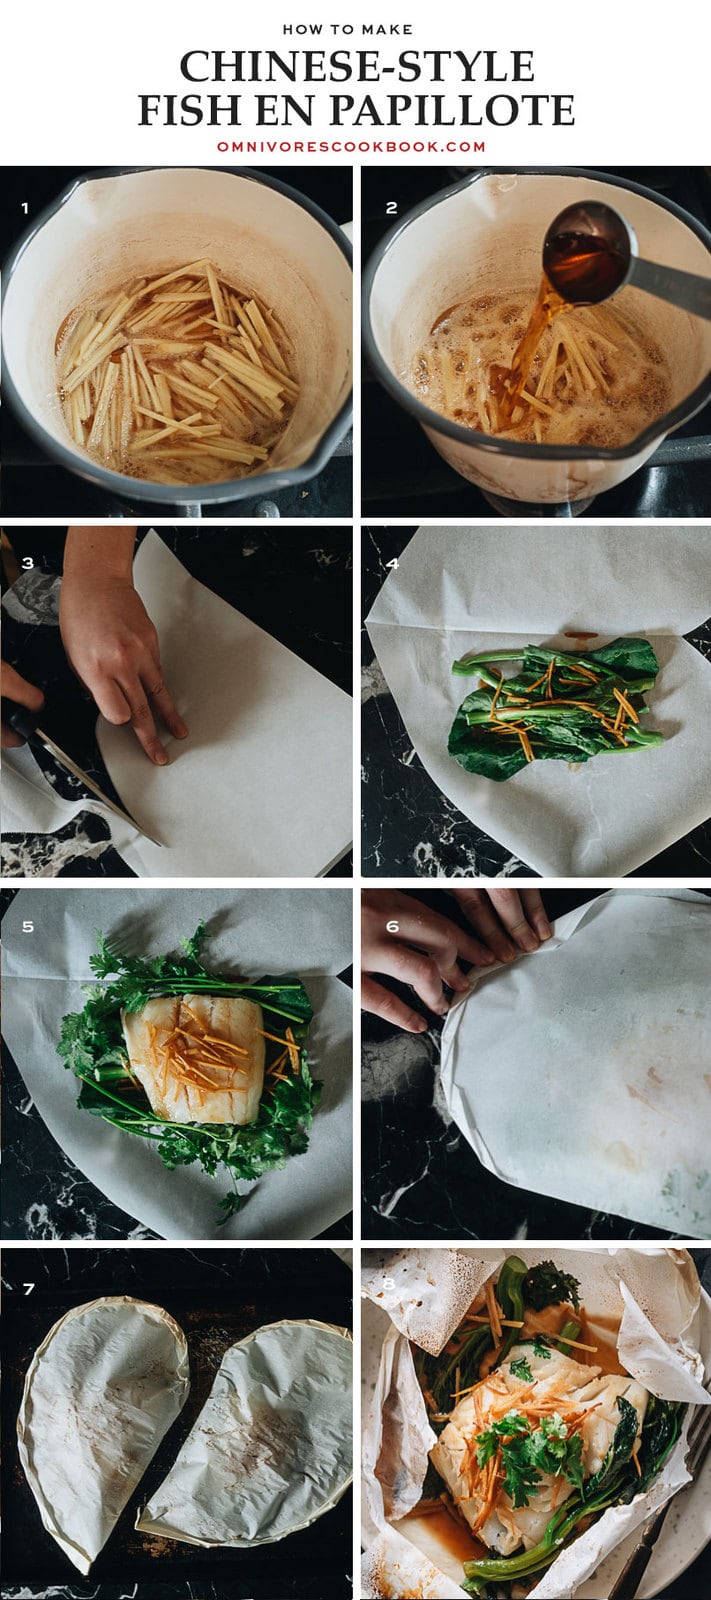 Chinese fish en papillote cooking step-by-step